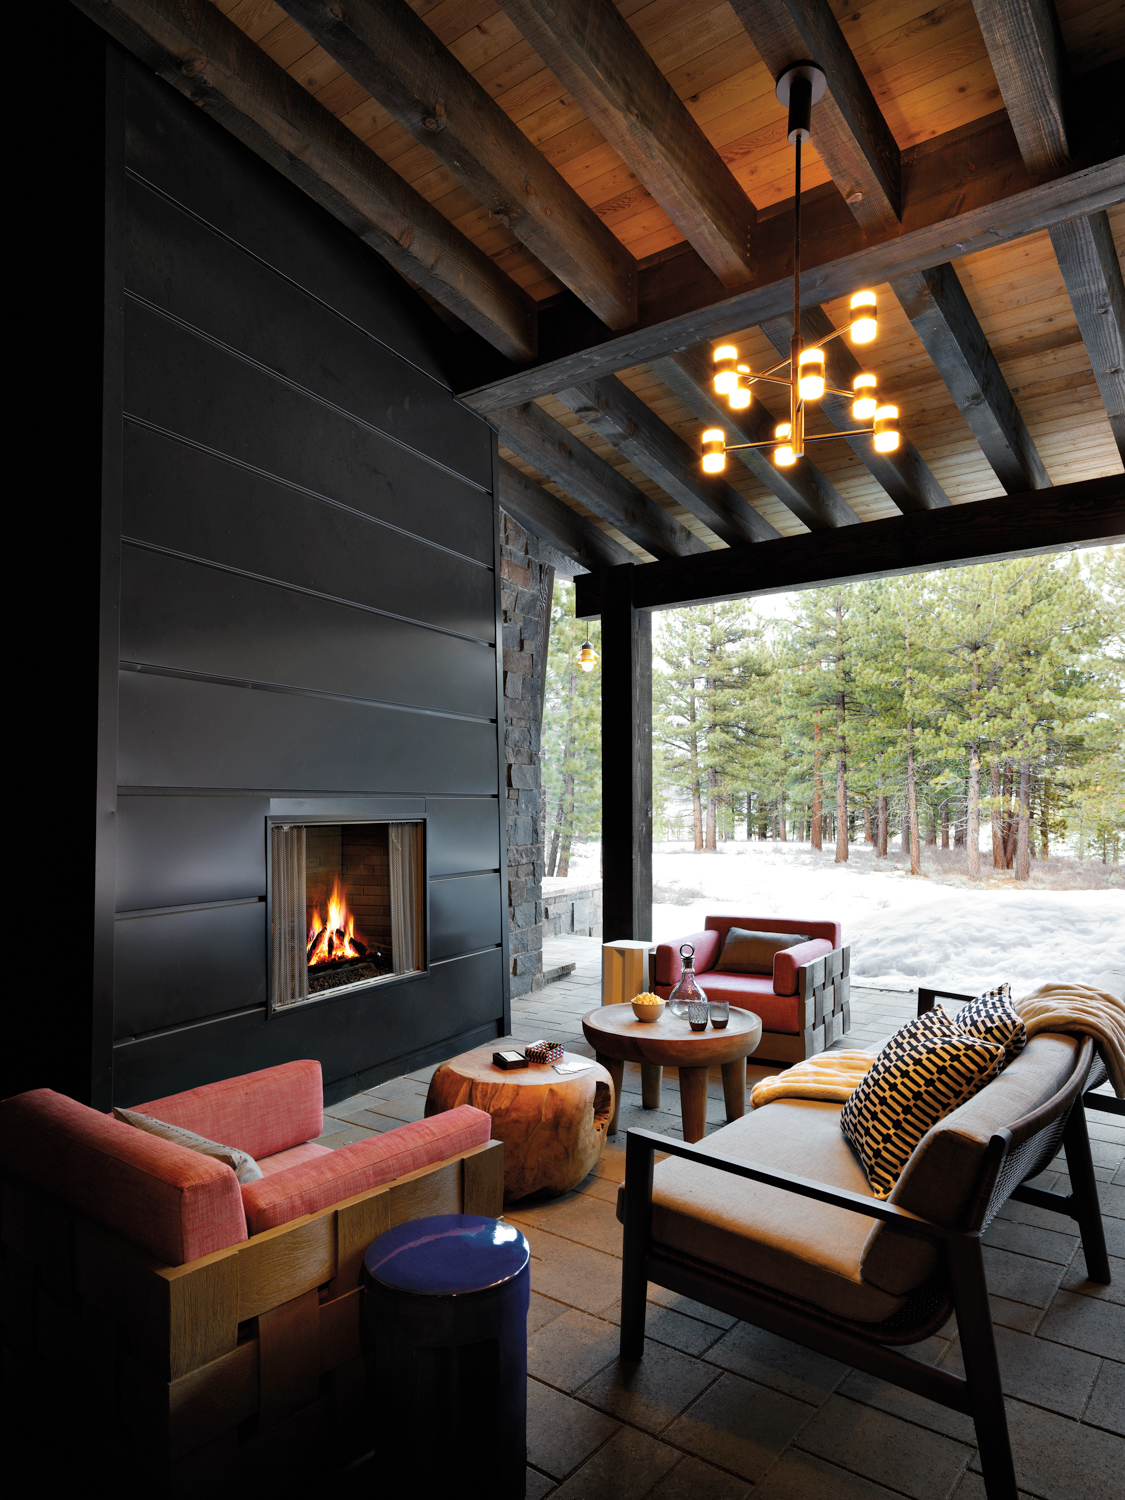 An outdoor space features a fireplace.